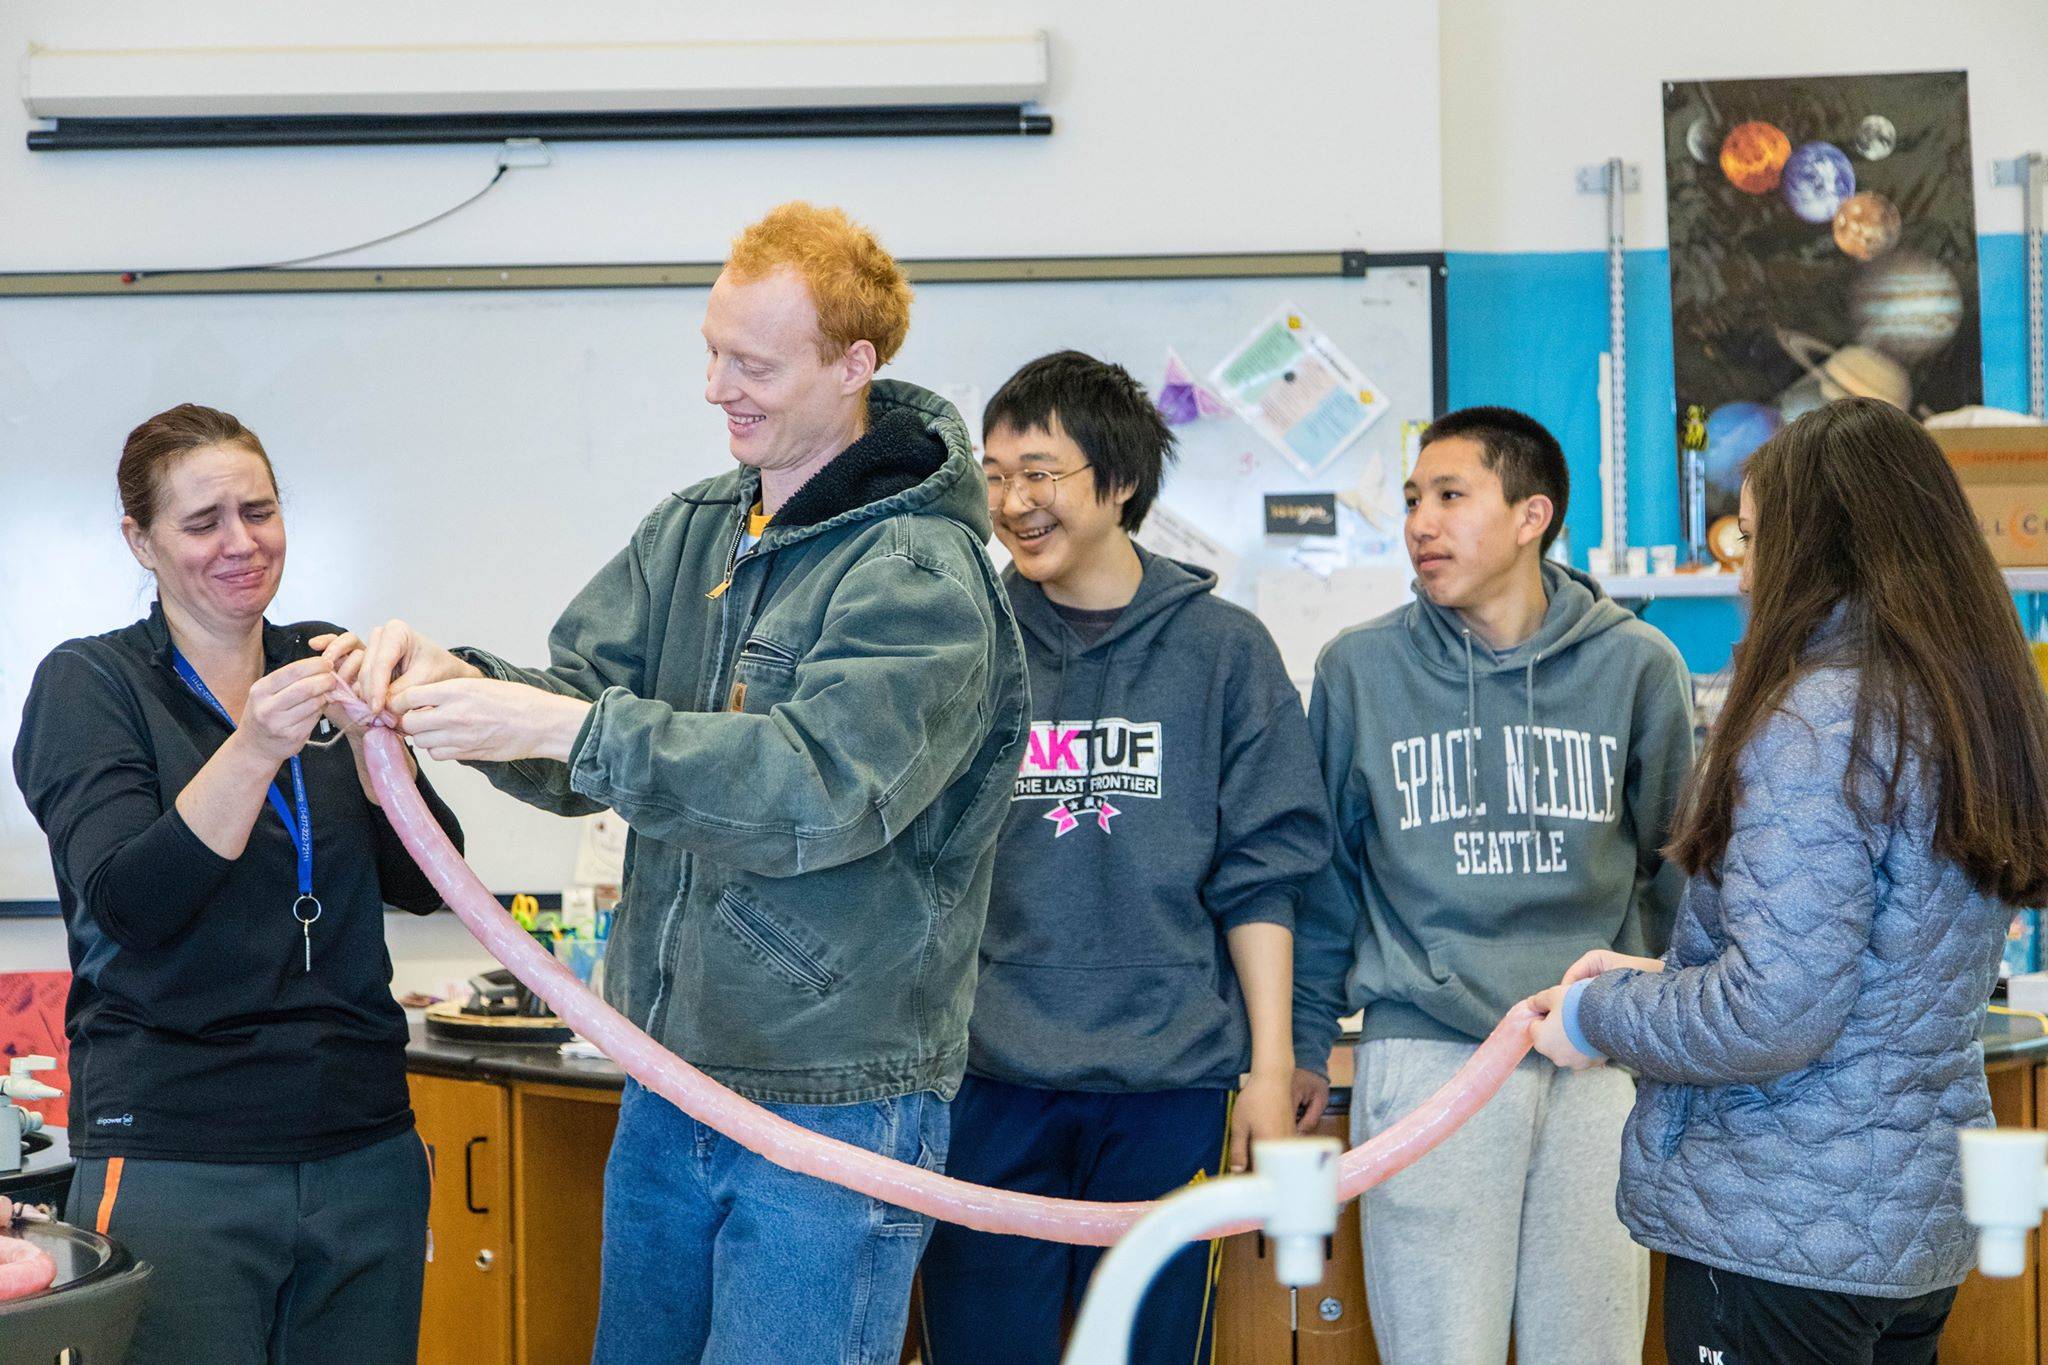 Photos by Erin Irwin/Education Week                                Kristian Nattinger, center, a former chemistry teacher at Scammon Bay School, helps tie off an inflated seal intestine as visiting math teacher Ellen Piekarski grimaces. Seal intestines are inflated, dried, and made into a traditional Yup’ik raincoat.